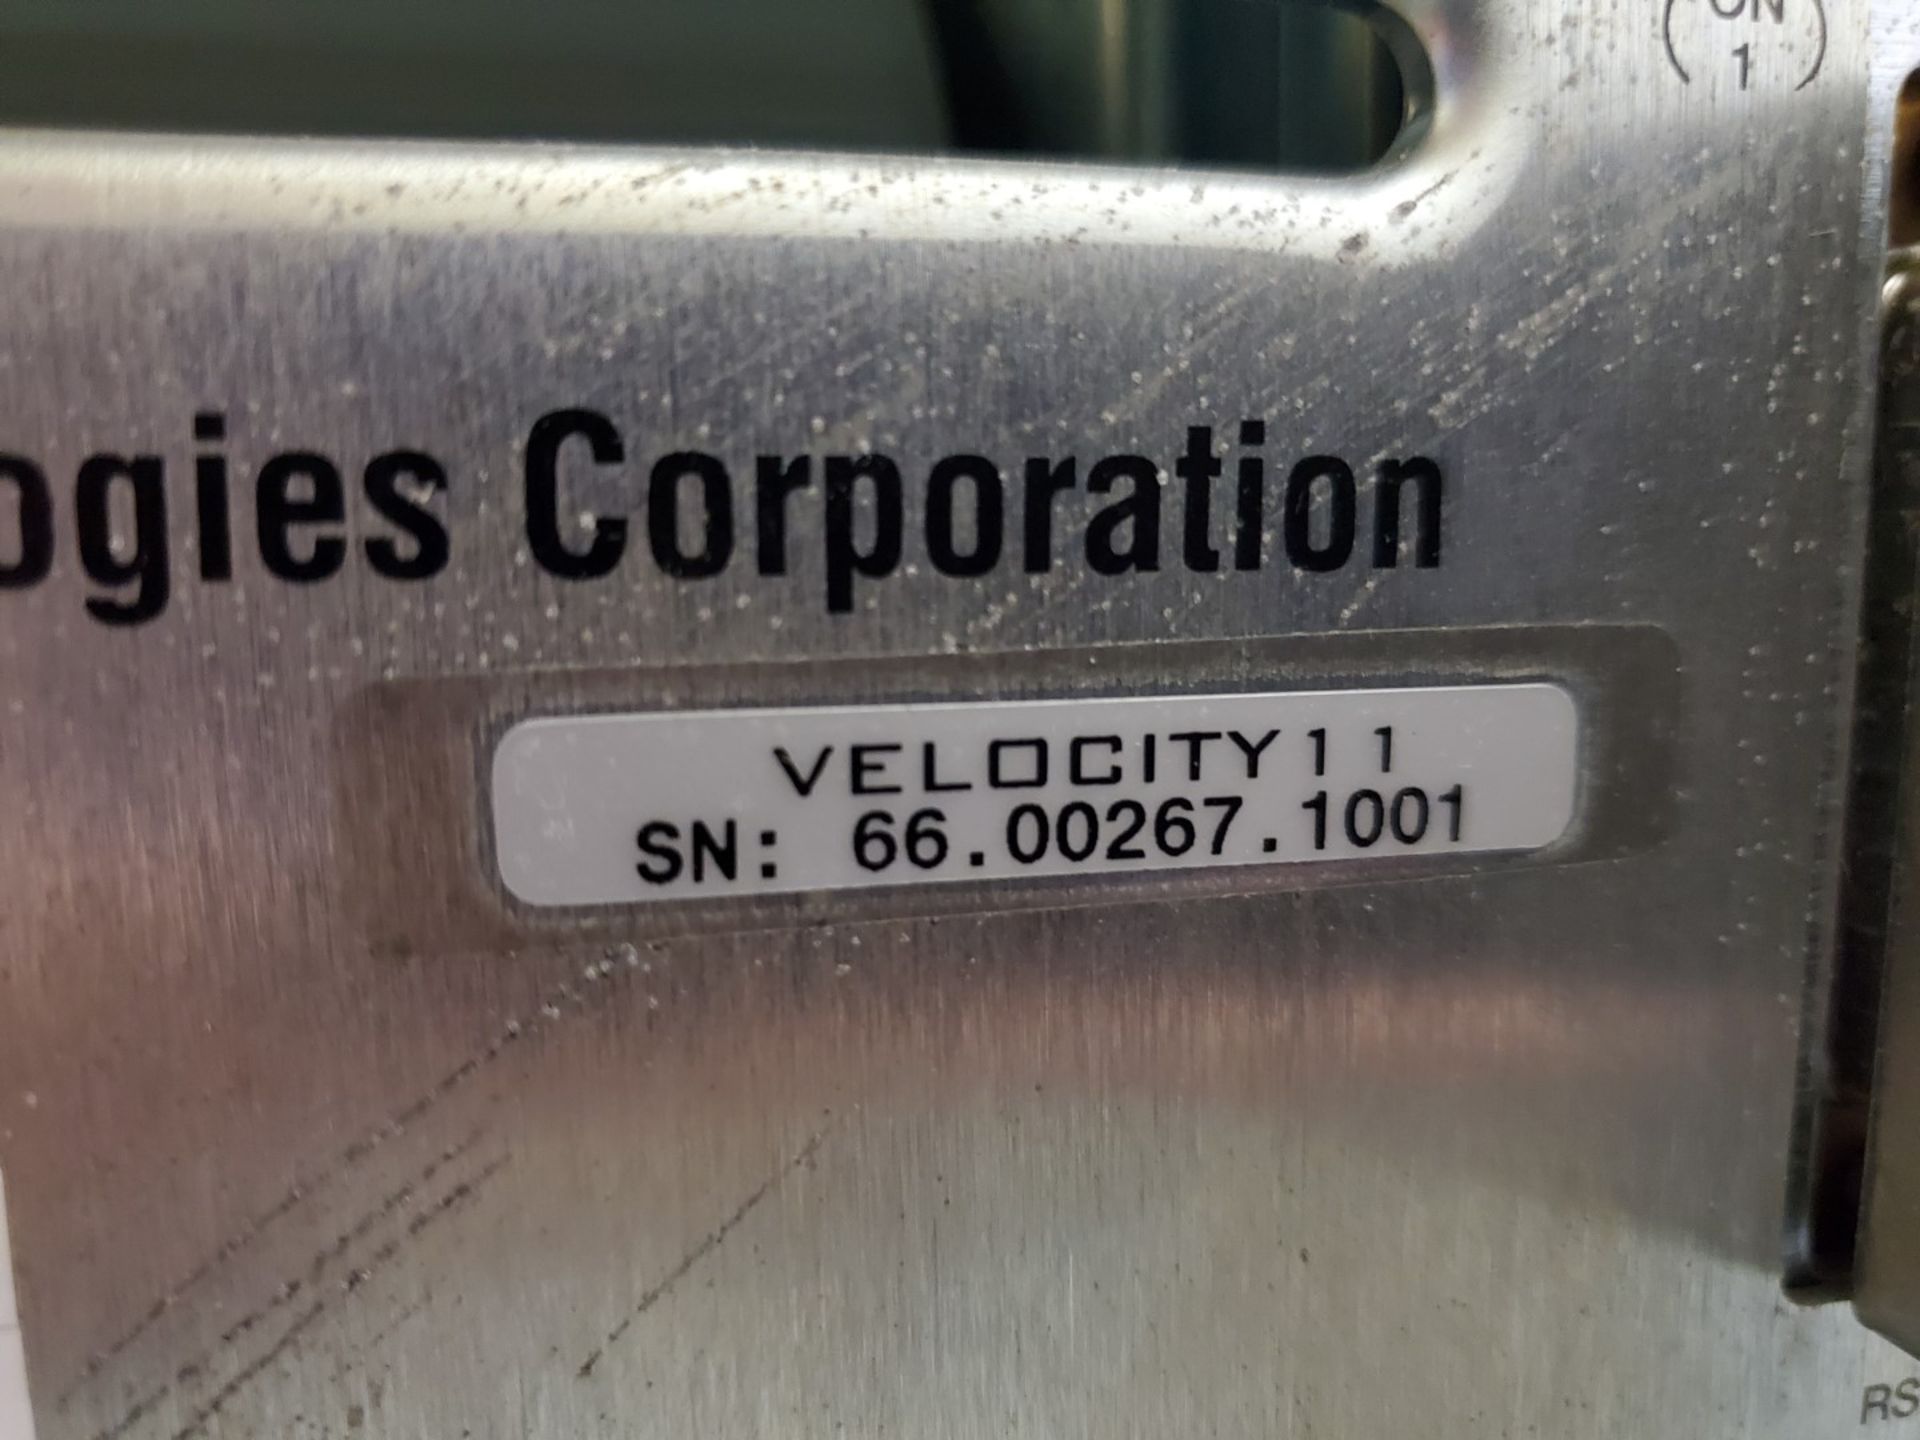 Precision Print VCODE Velocity 11 Microplate Labeler - Image 2 of 6